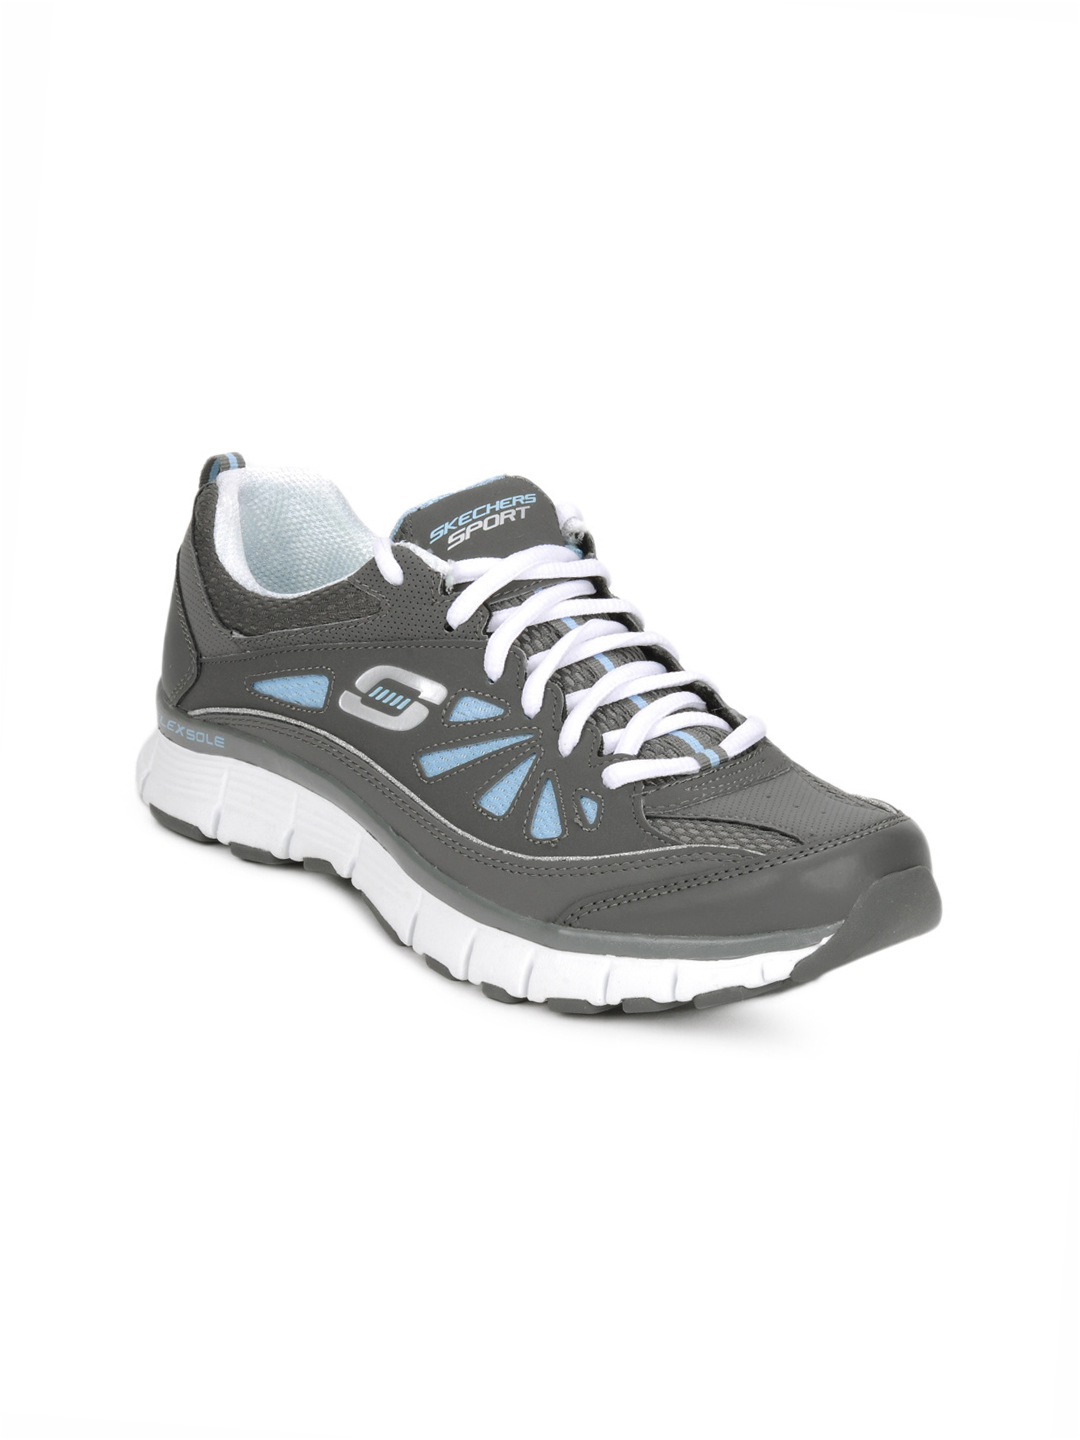 Download this Sports Shoes... picture